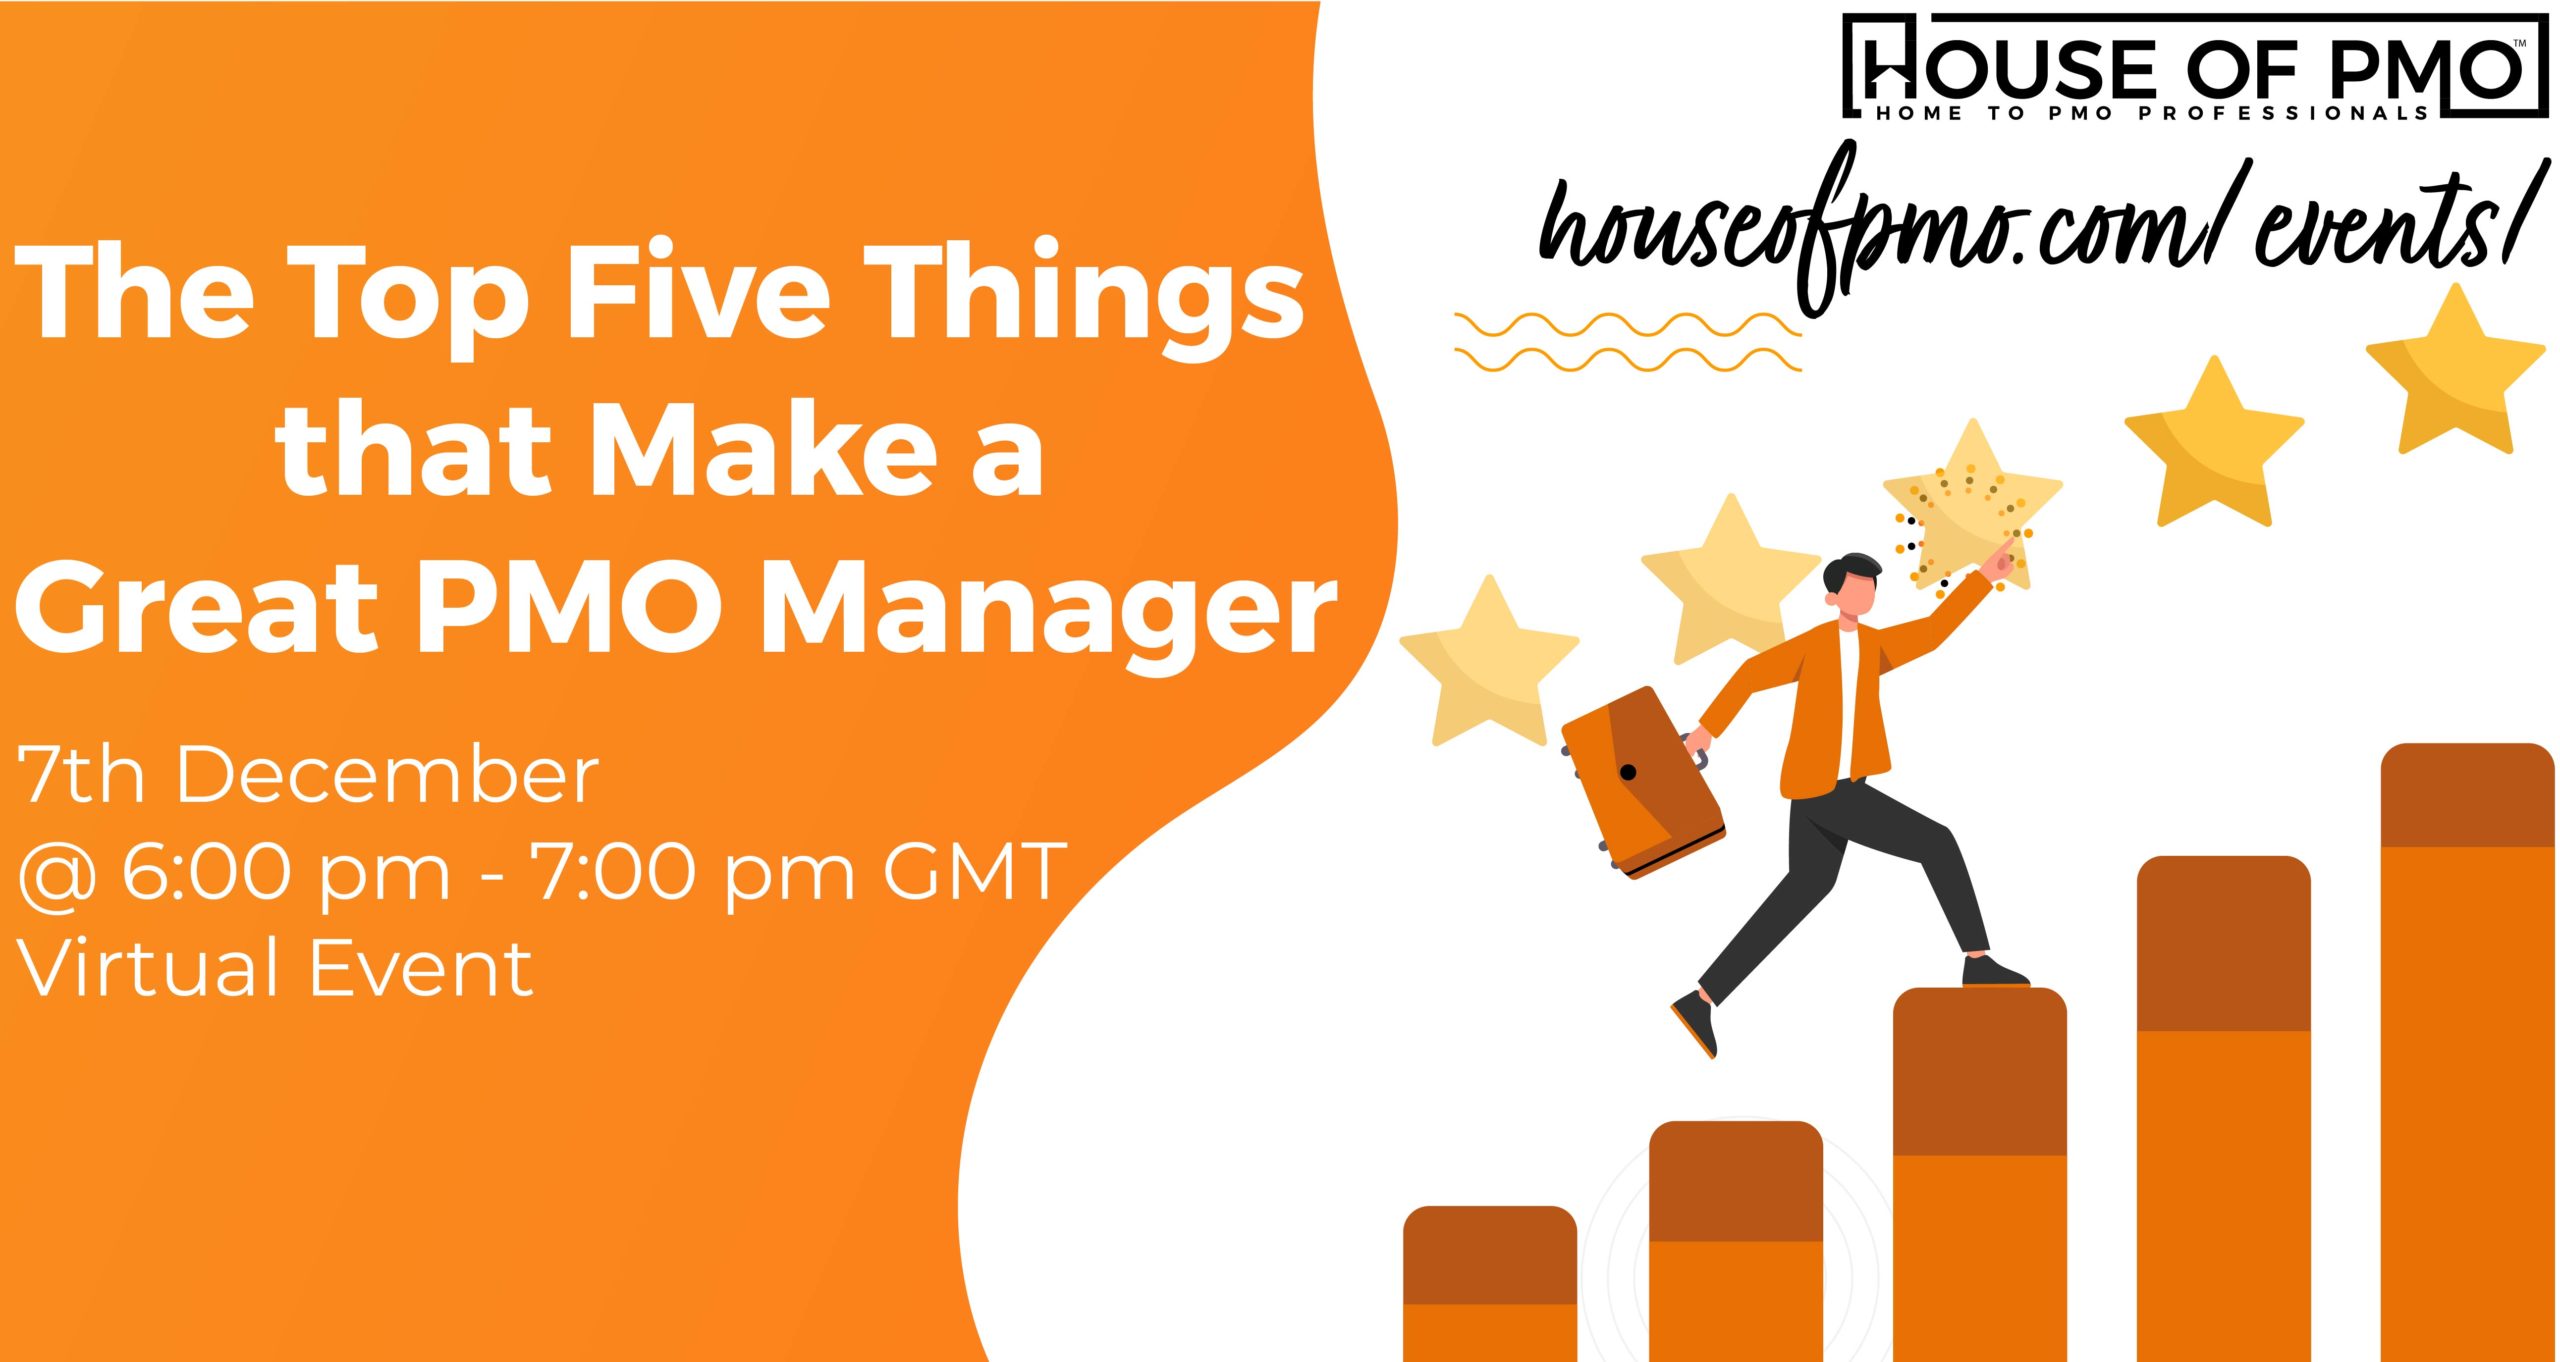 Event image for the top 5 things that make a great PMO manager